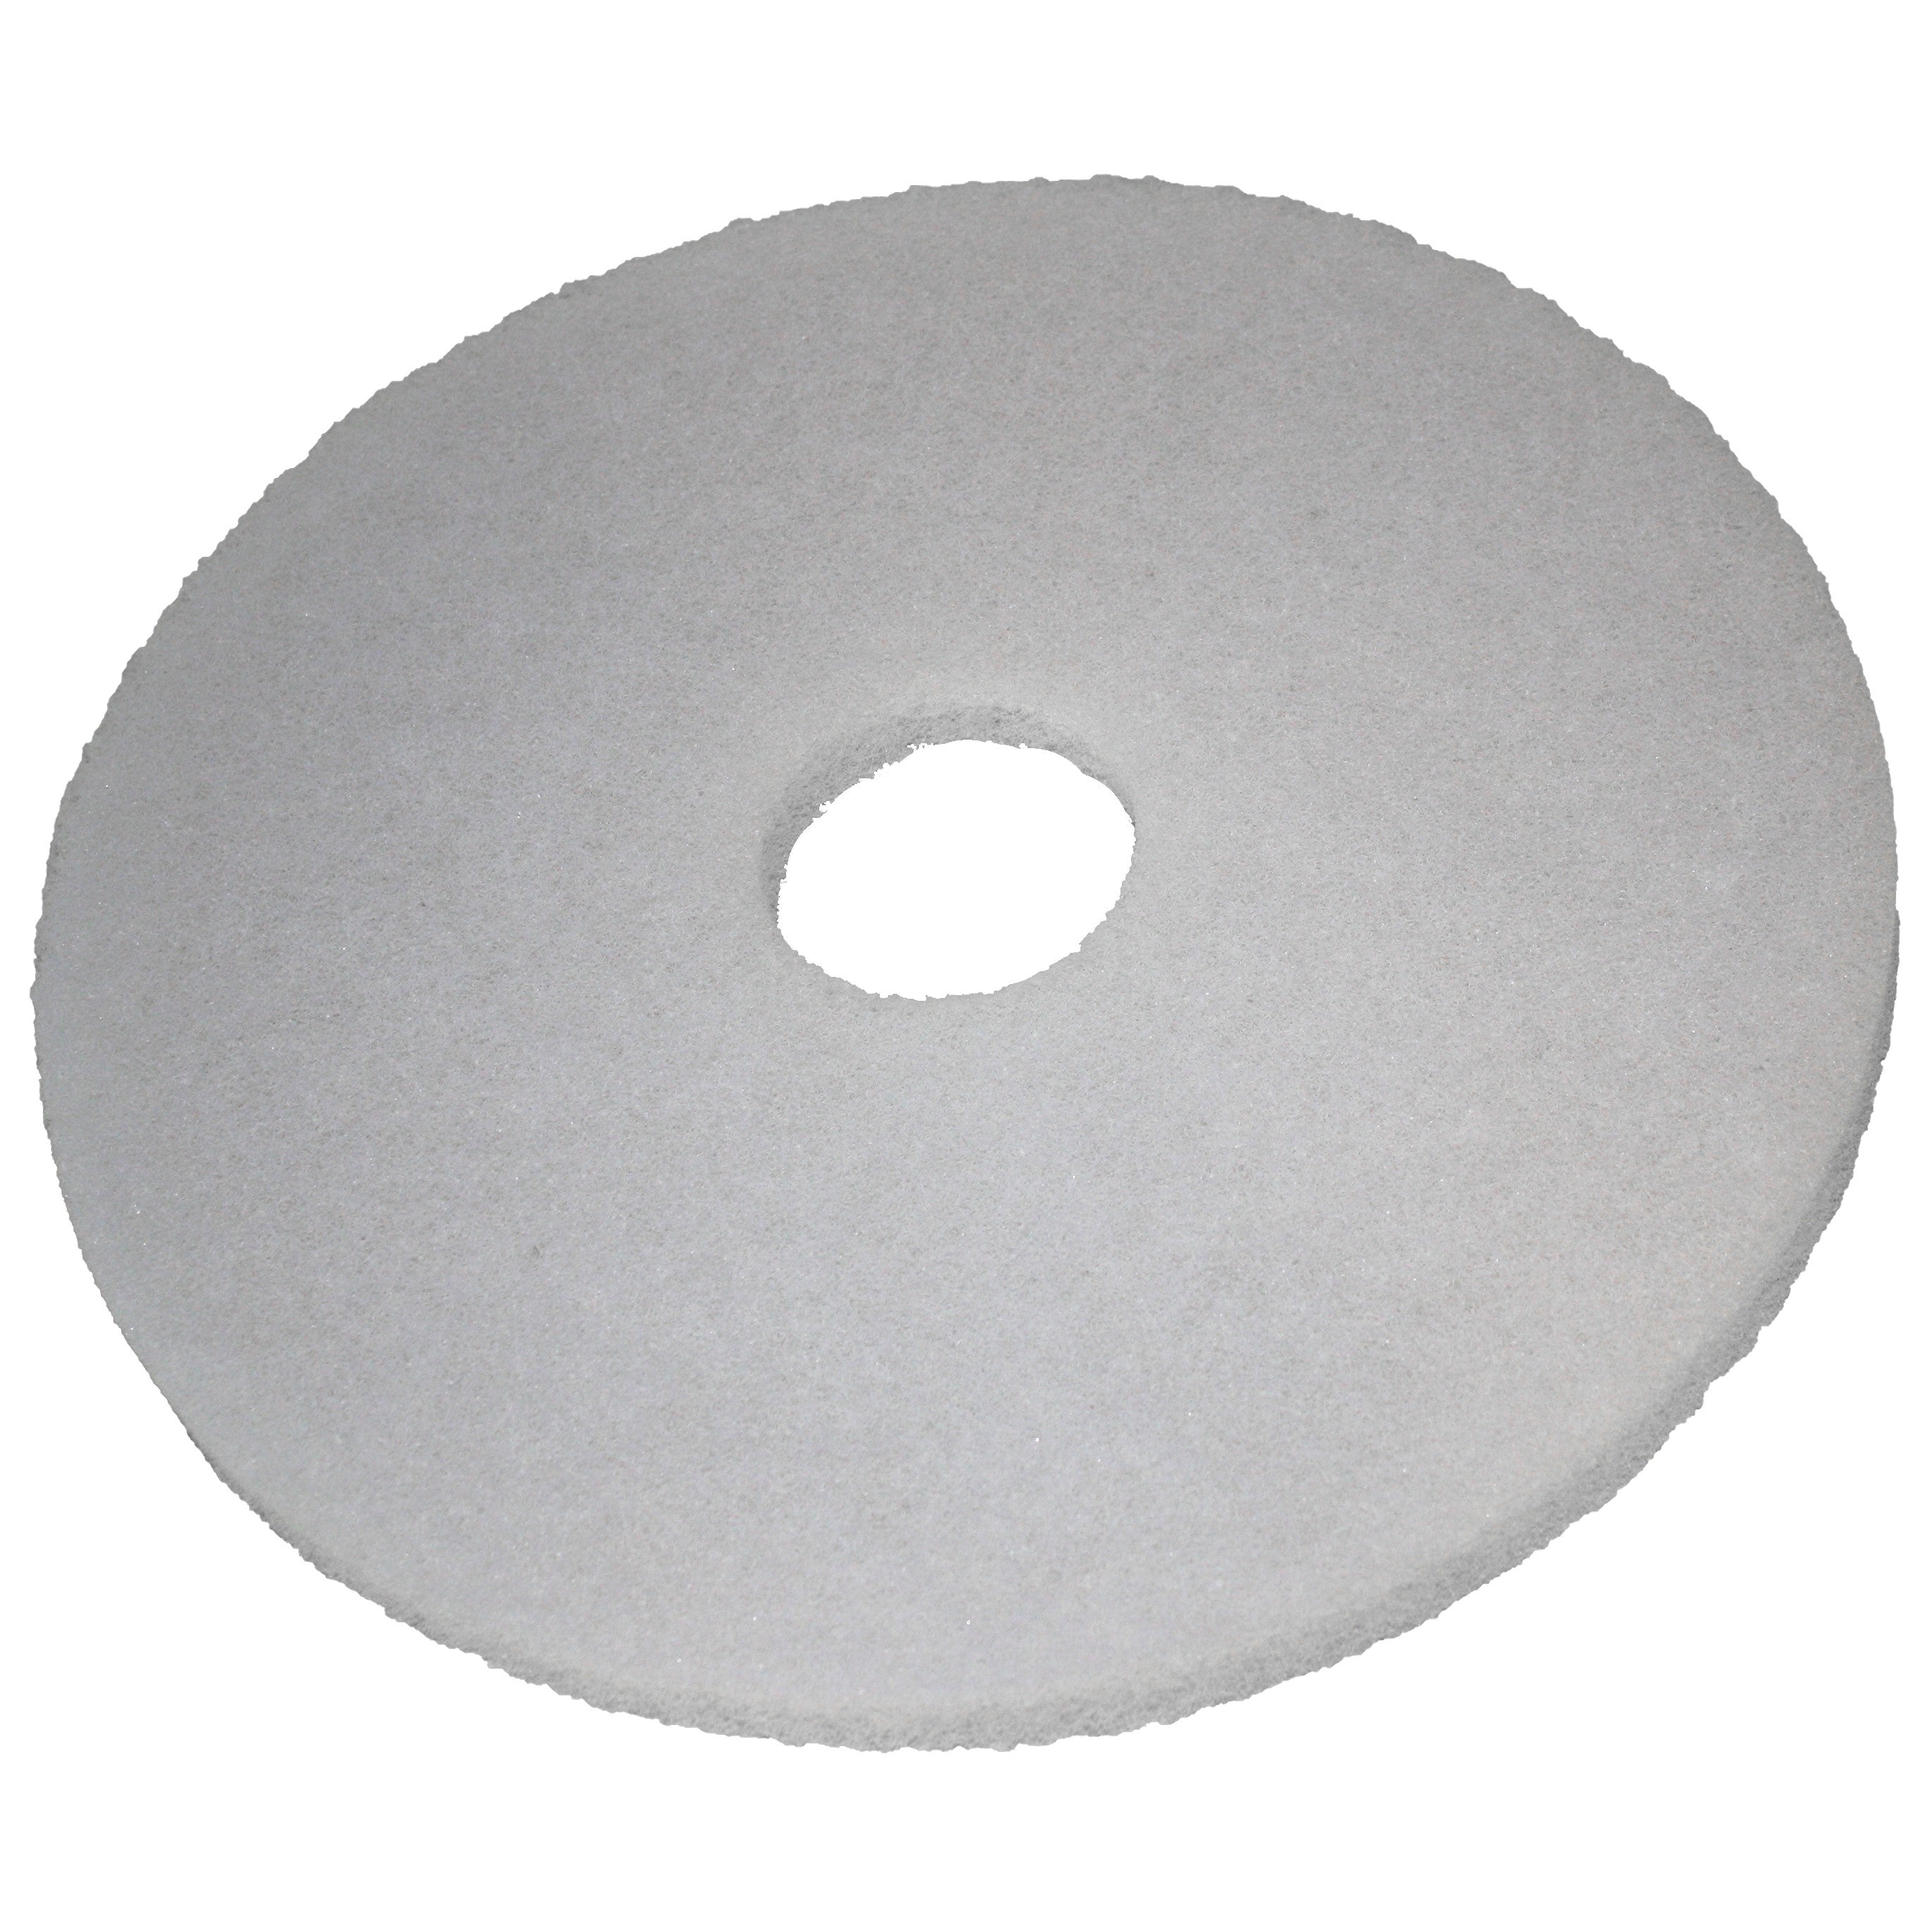 Pad weiss, Ø 432 mm, Polyester